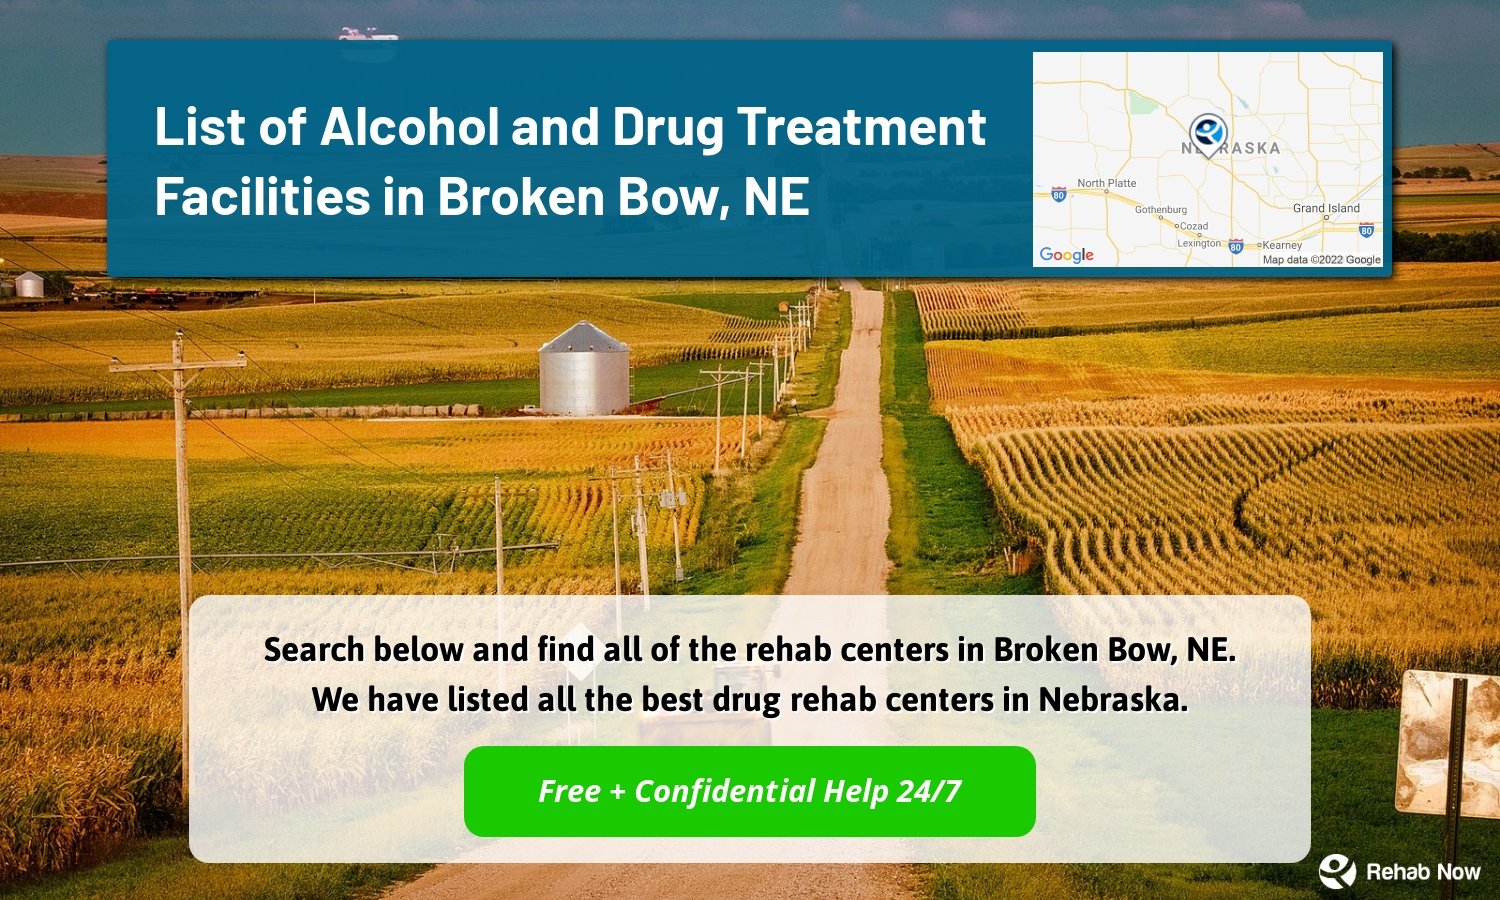 Search below and find all of the rehab centers in Broken Bow, NE. We have listed all the best drug rehab centers in Nebraska.